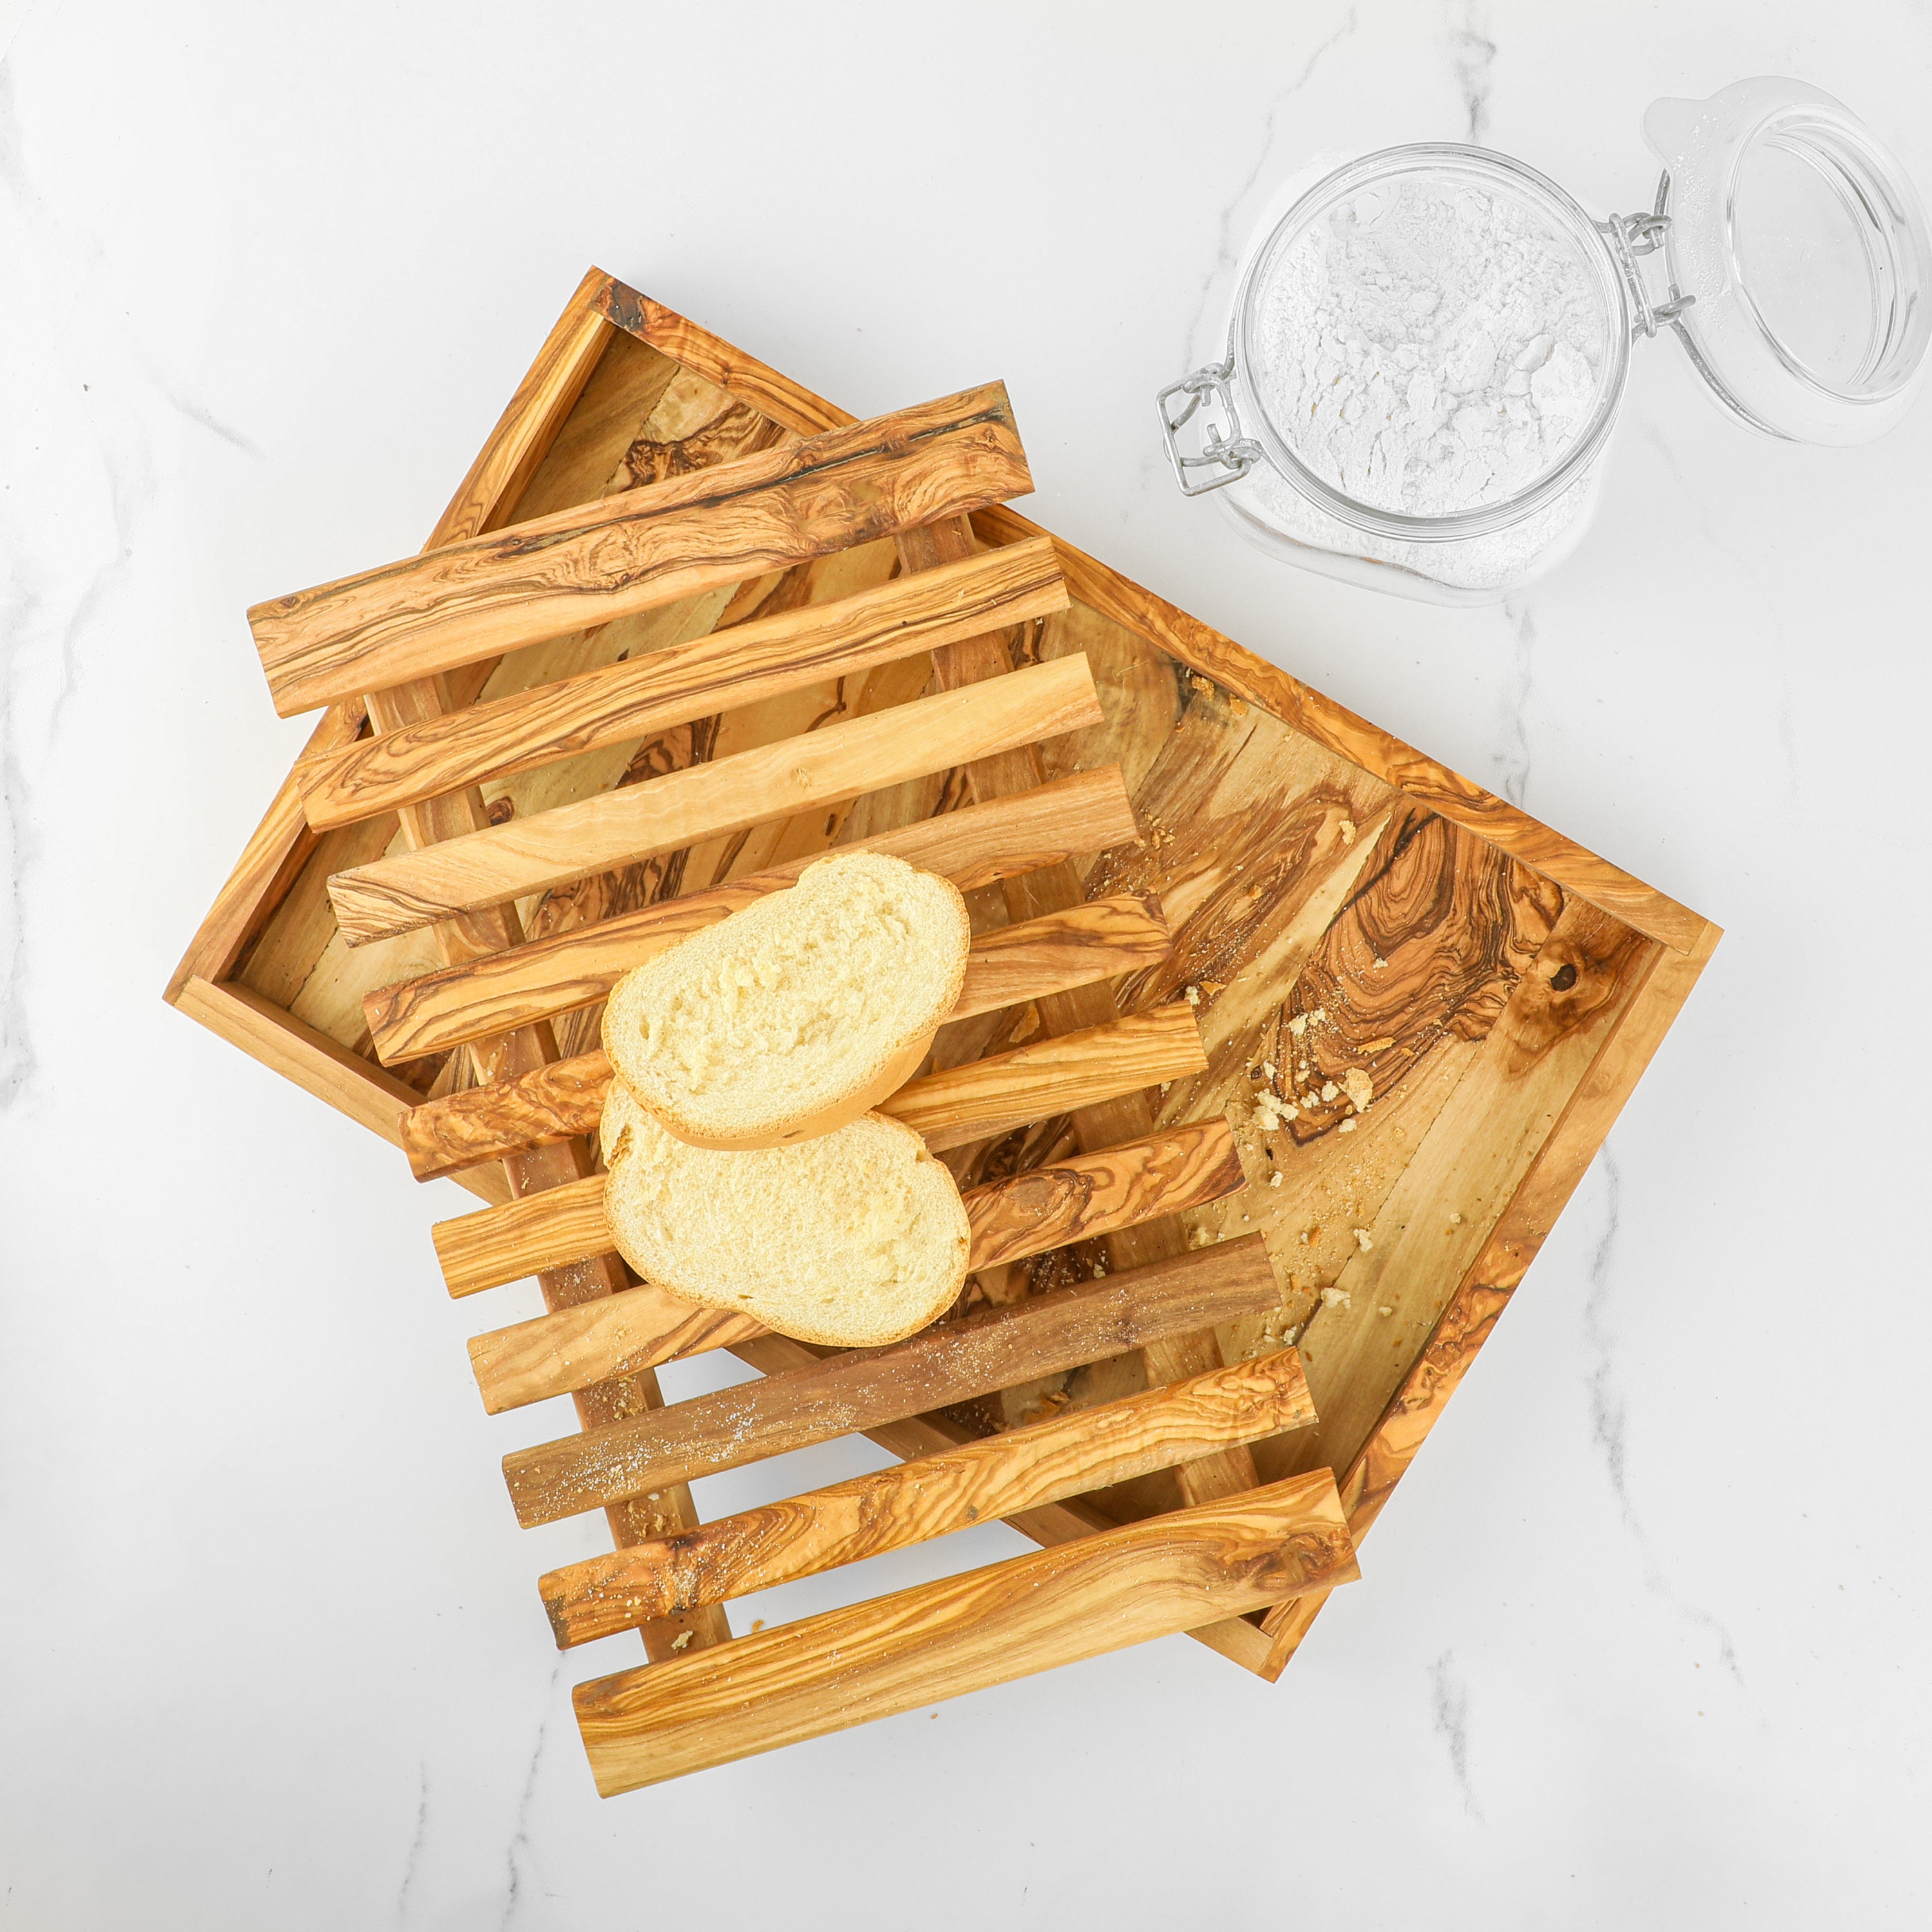 French Bread Board Handmade From Olive Wood Antique-style Bread